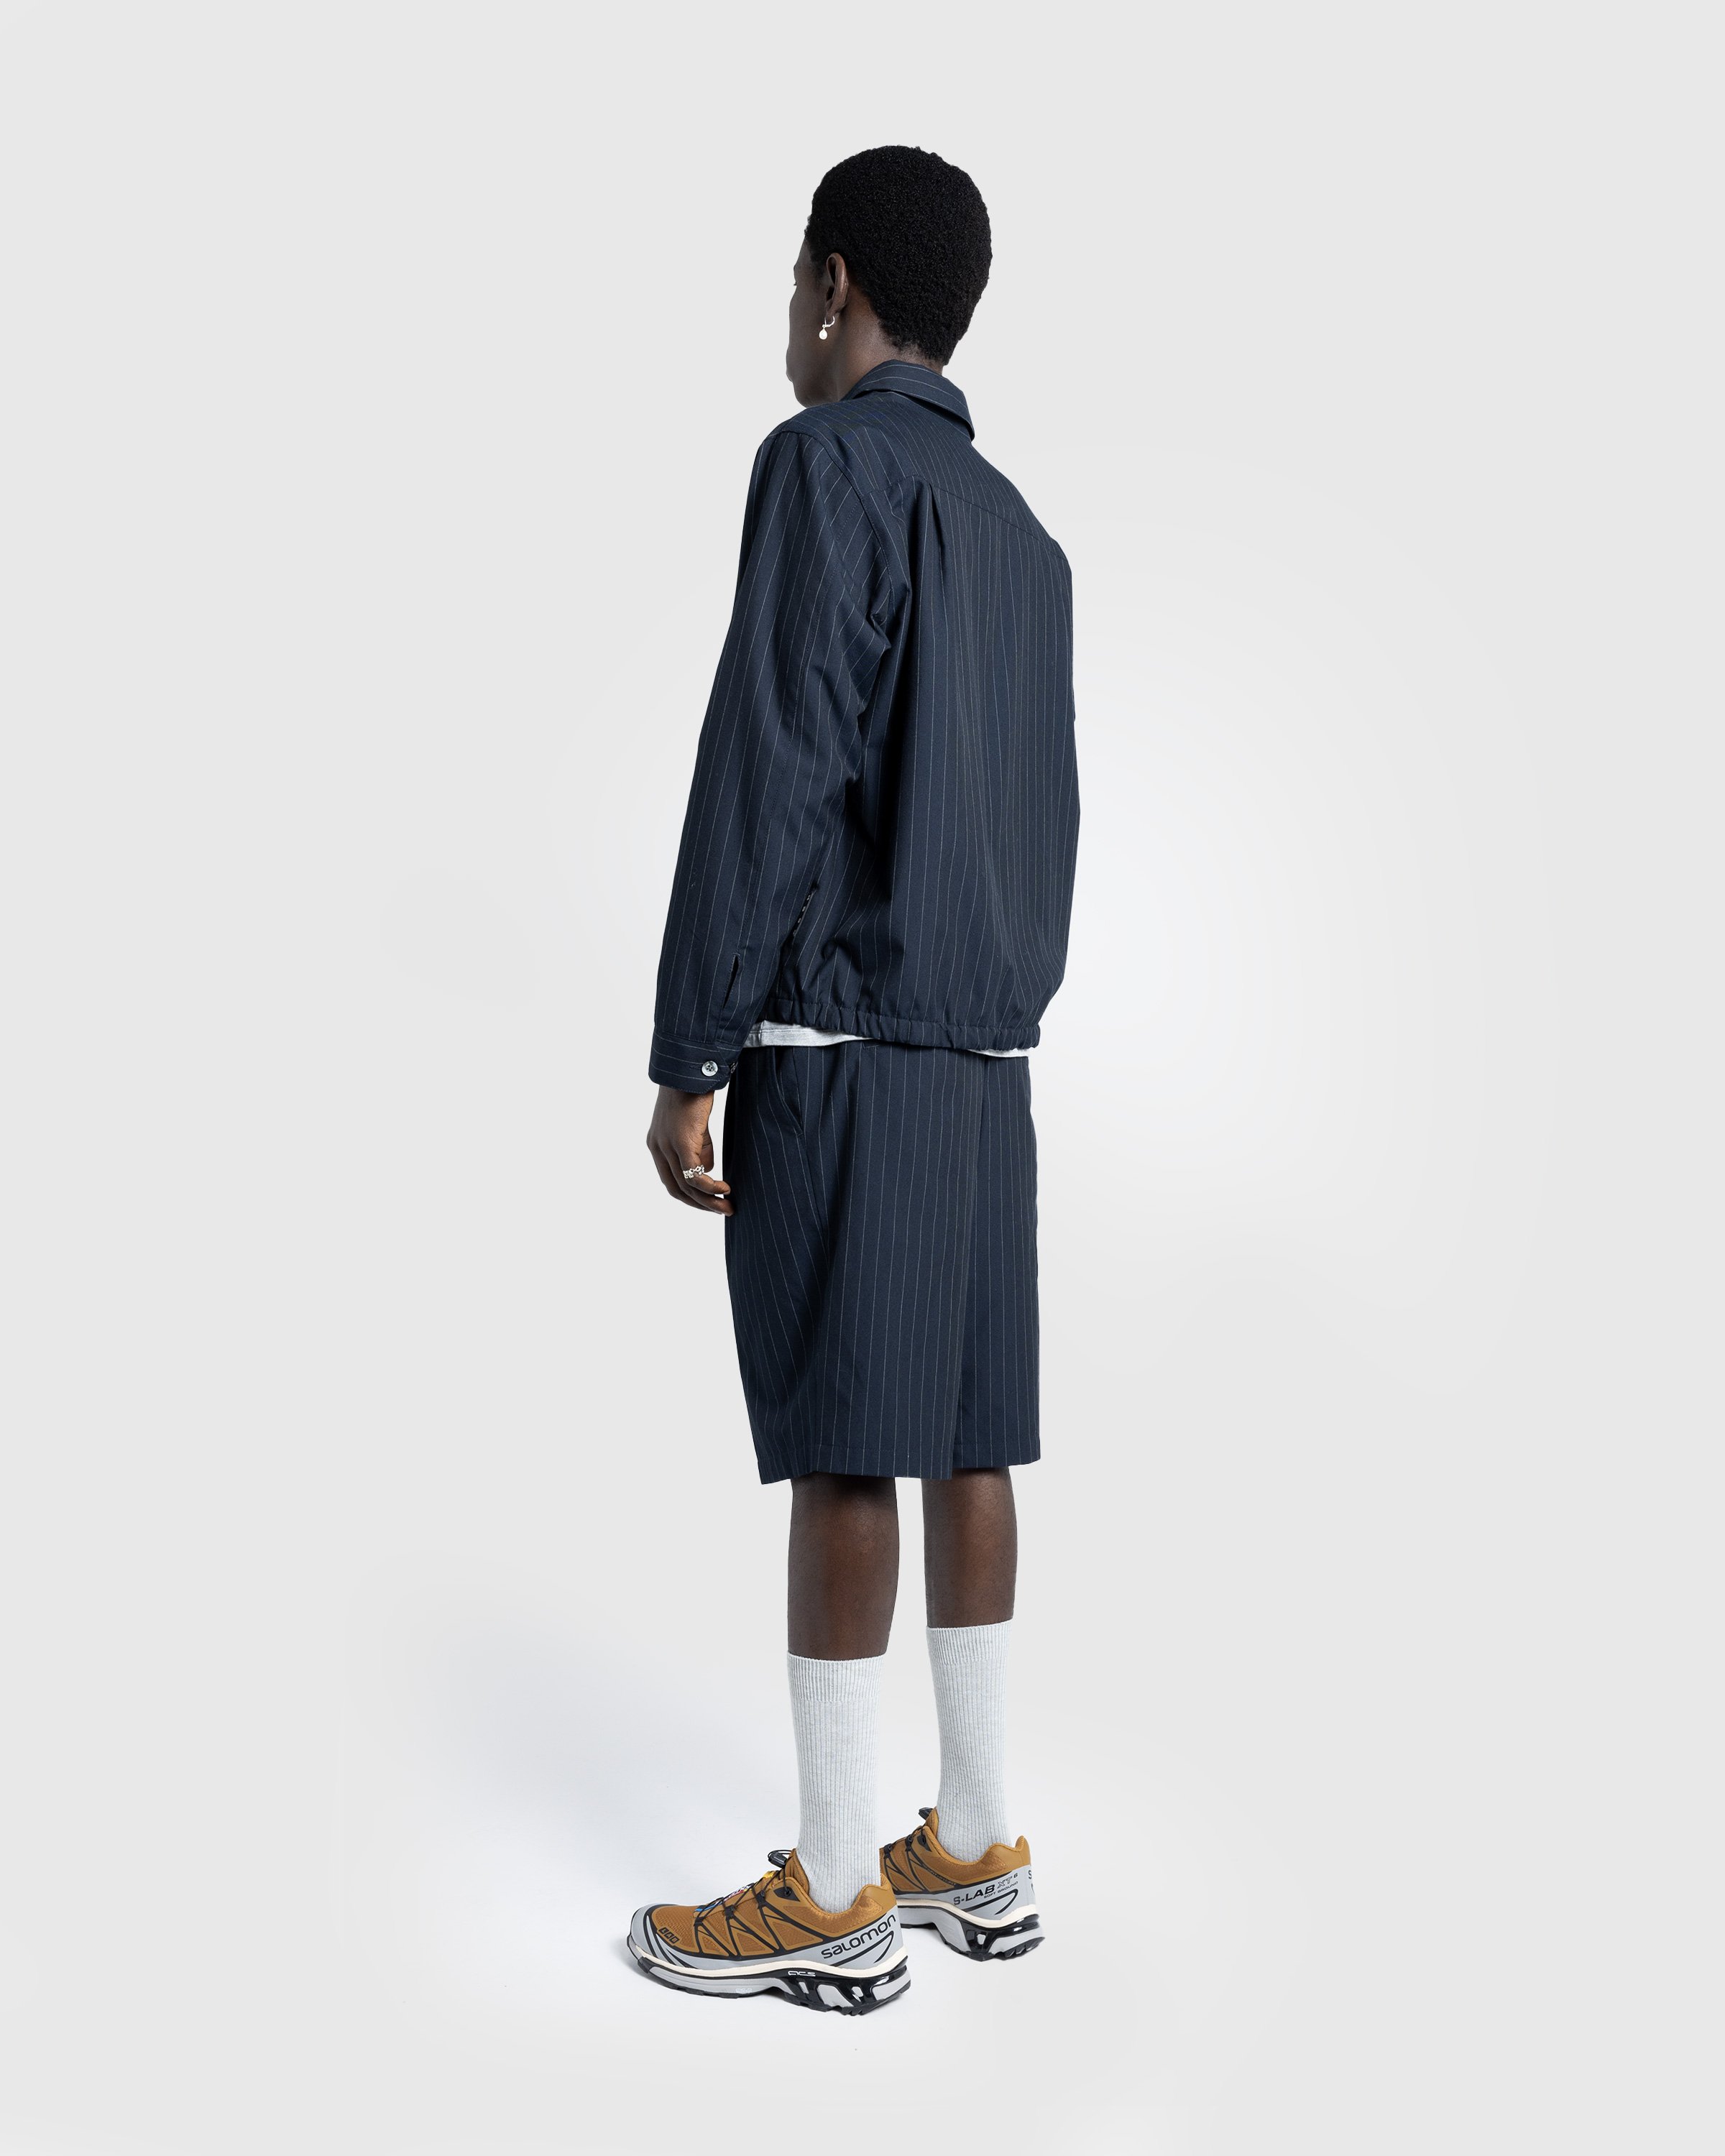 Highsnobiety HS05 - Tropical Suiting Shorts Stripes Navy - Clothing - Stripes Navy - Image 5